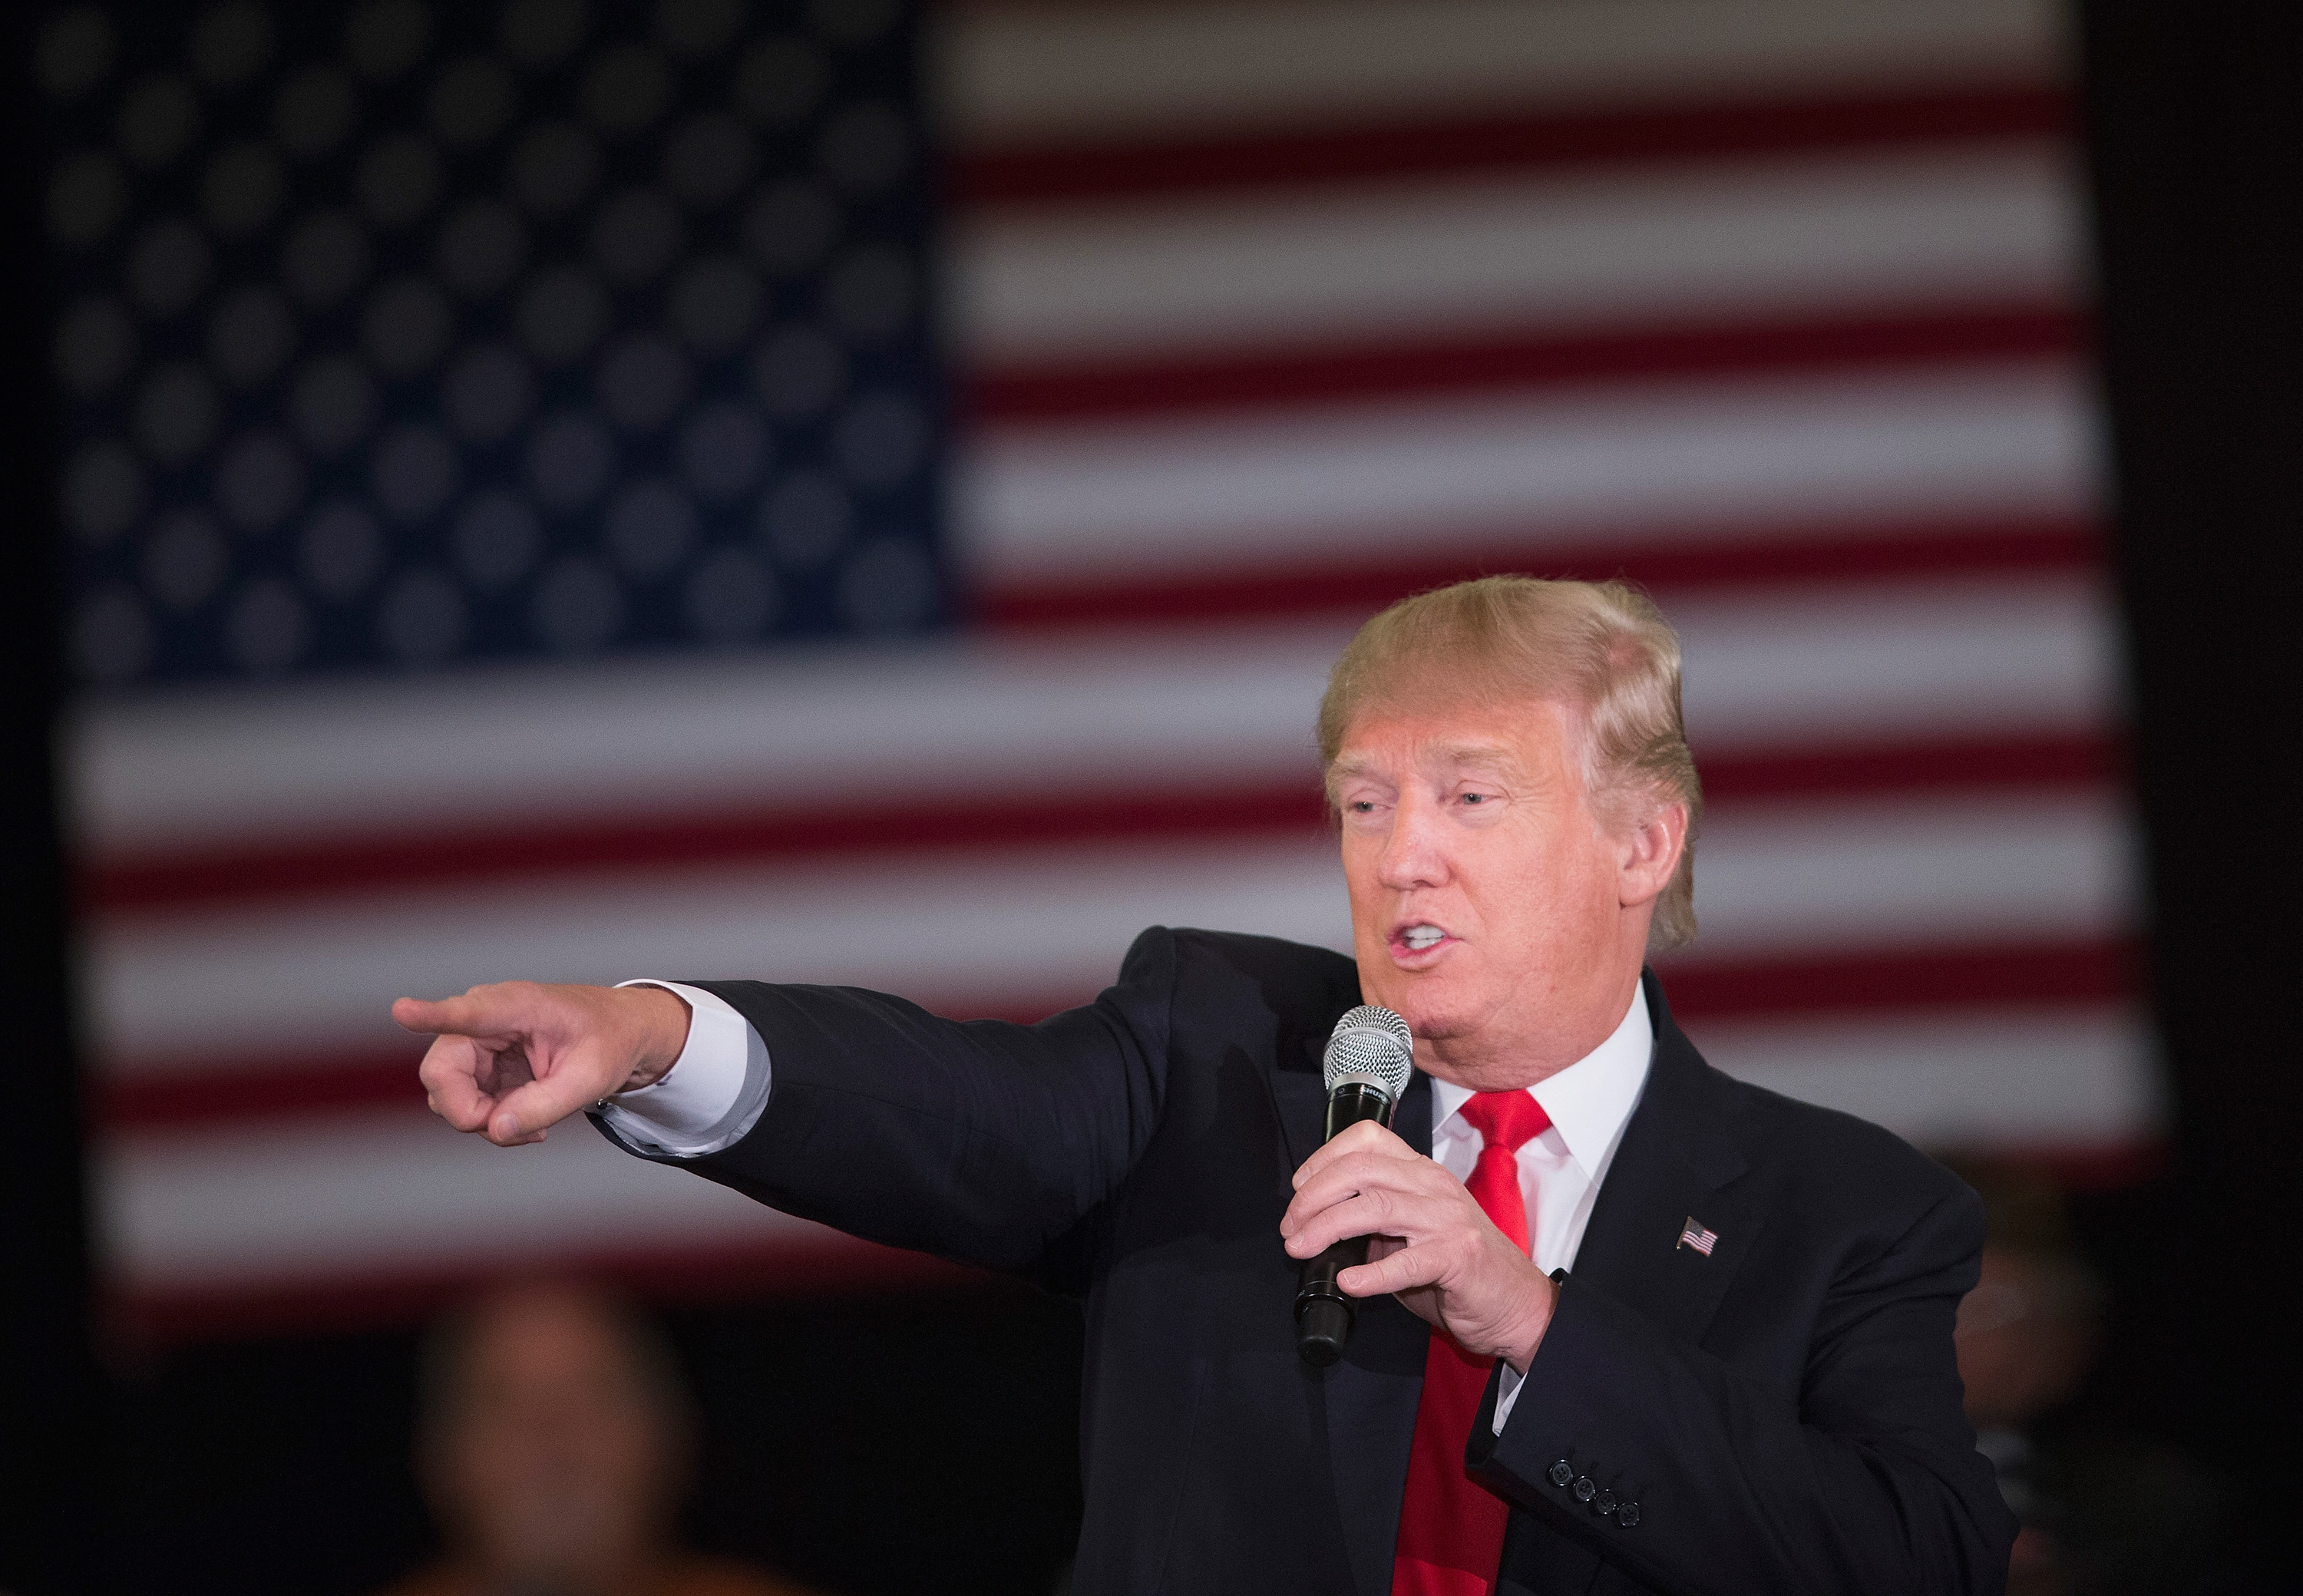 GOP Presidential Candidate Donald Trump Campaigns Near Green Bay, Wisconsin